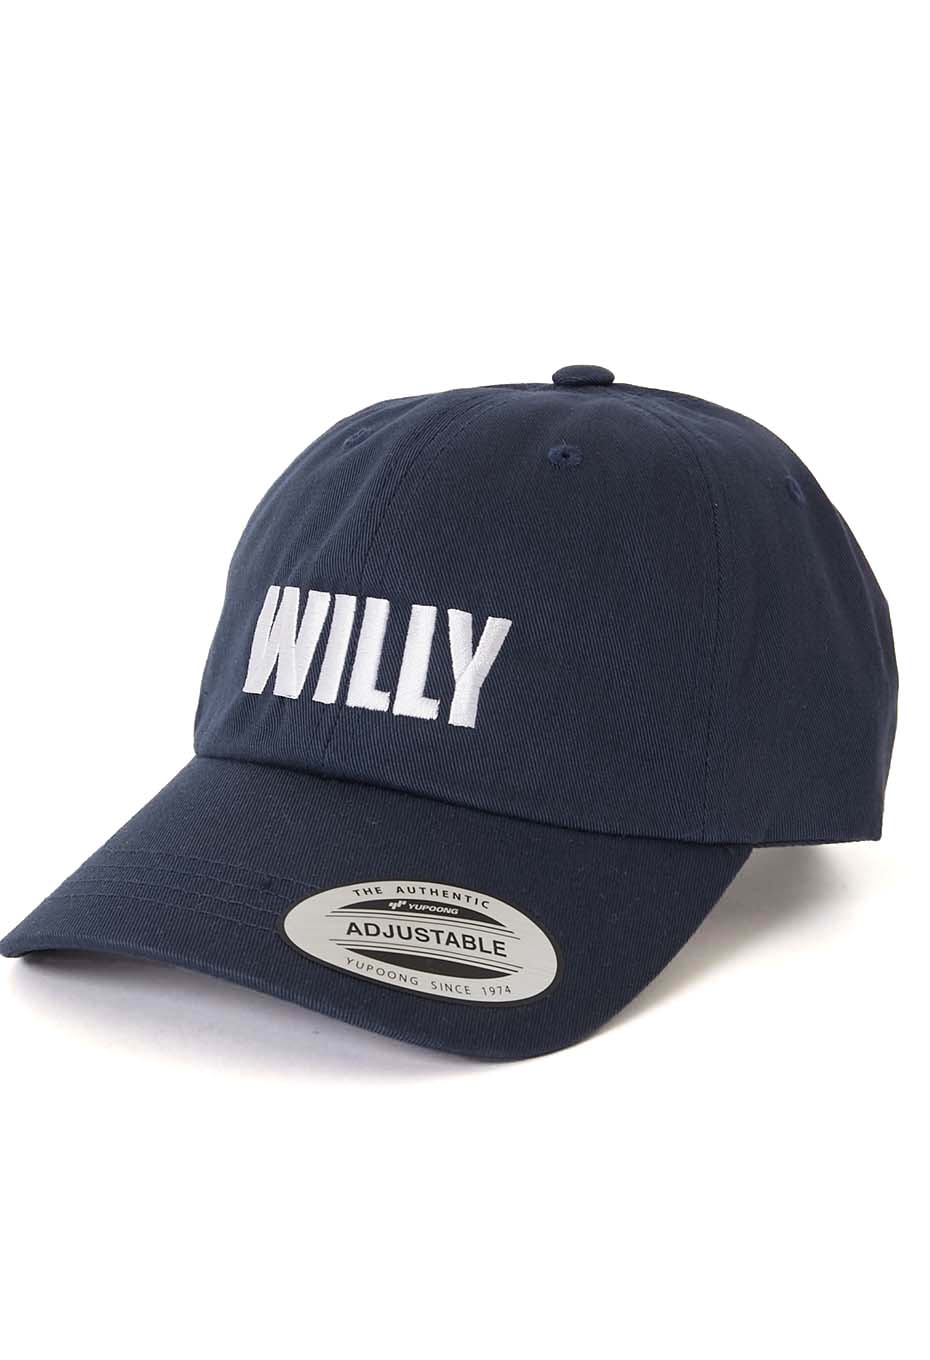 WILLY CHAVARRIA /WILLY キャップ 2